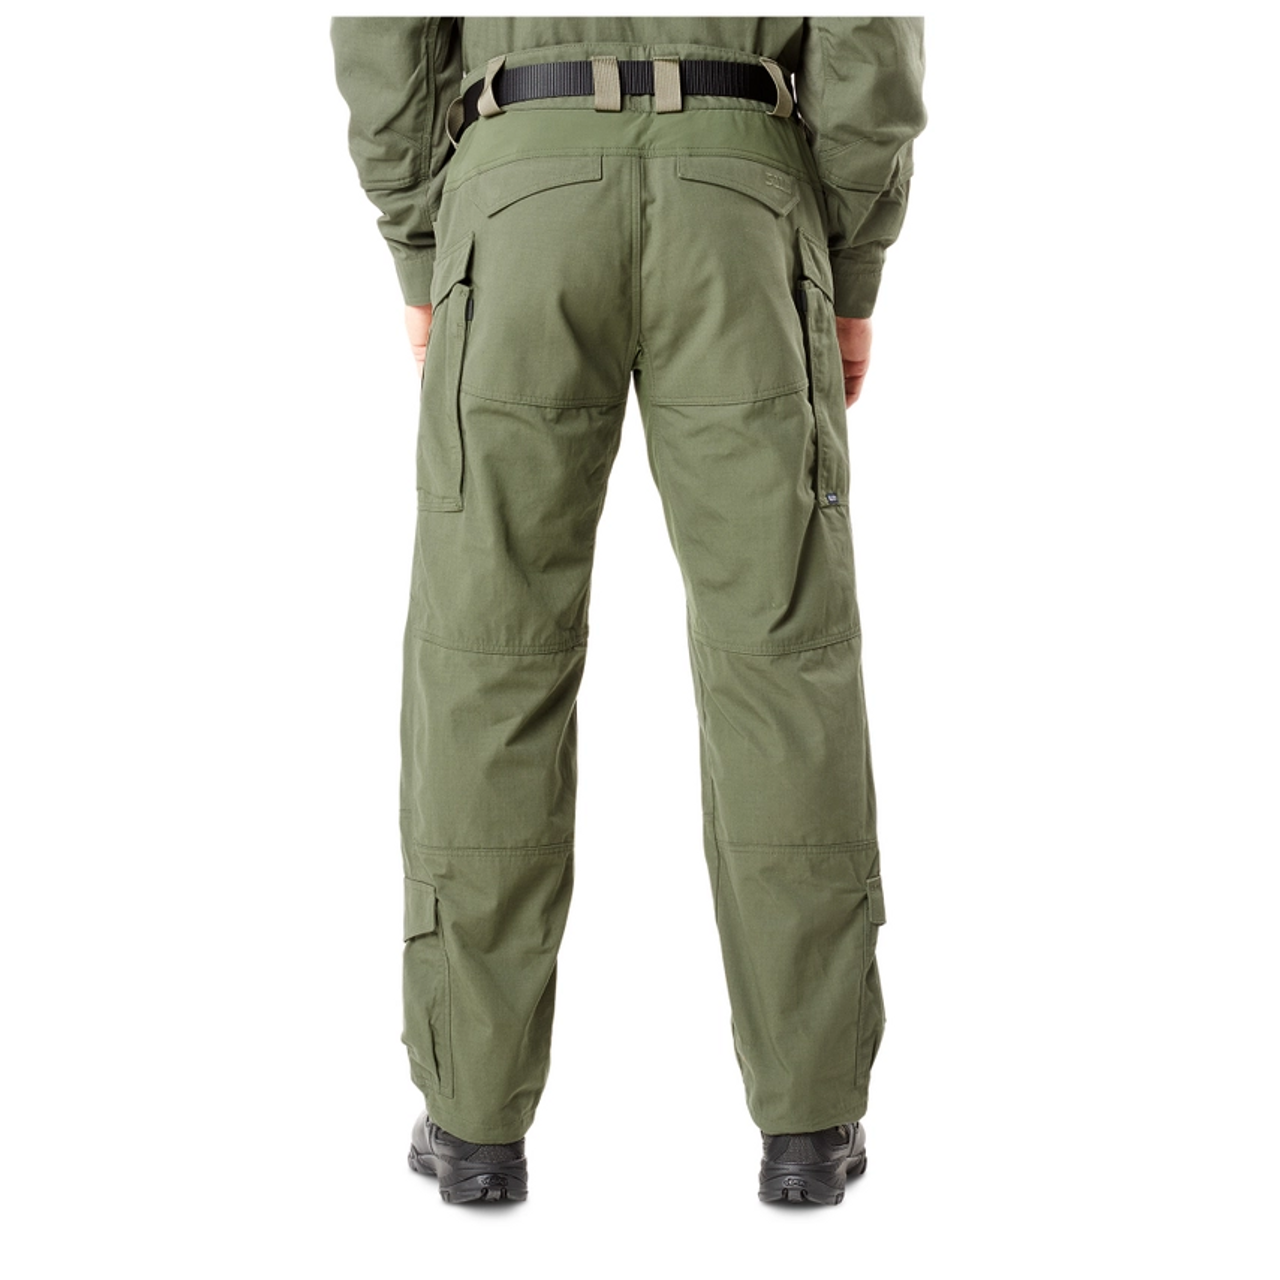 XPRT Tactical Pant for Missions